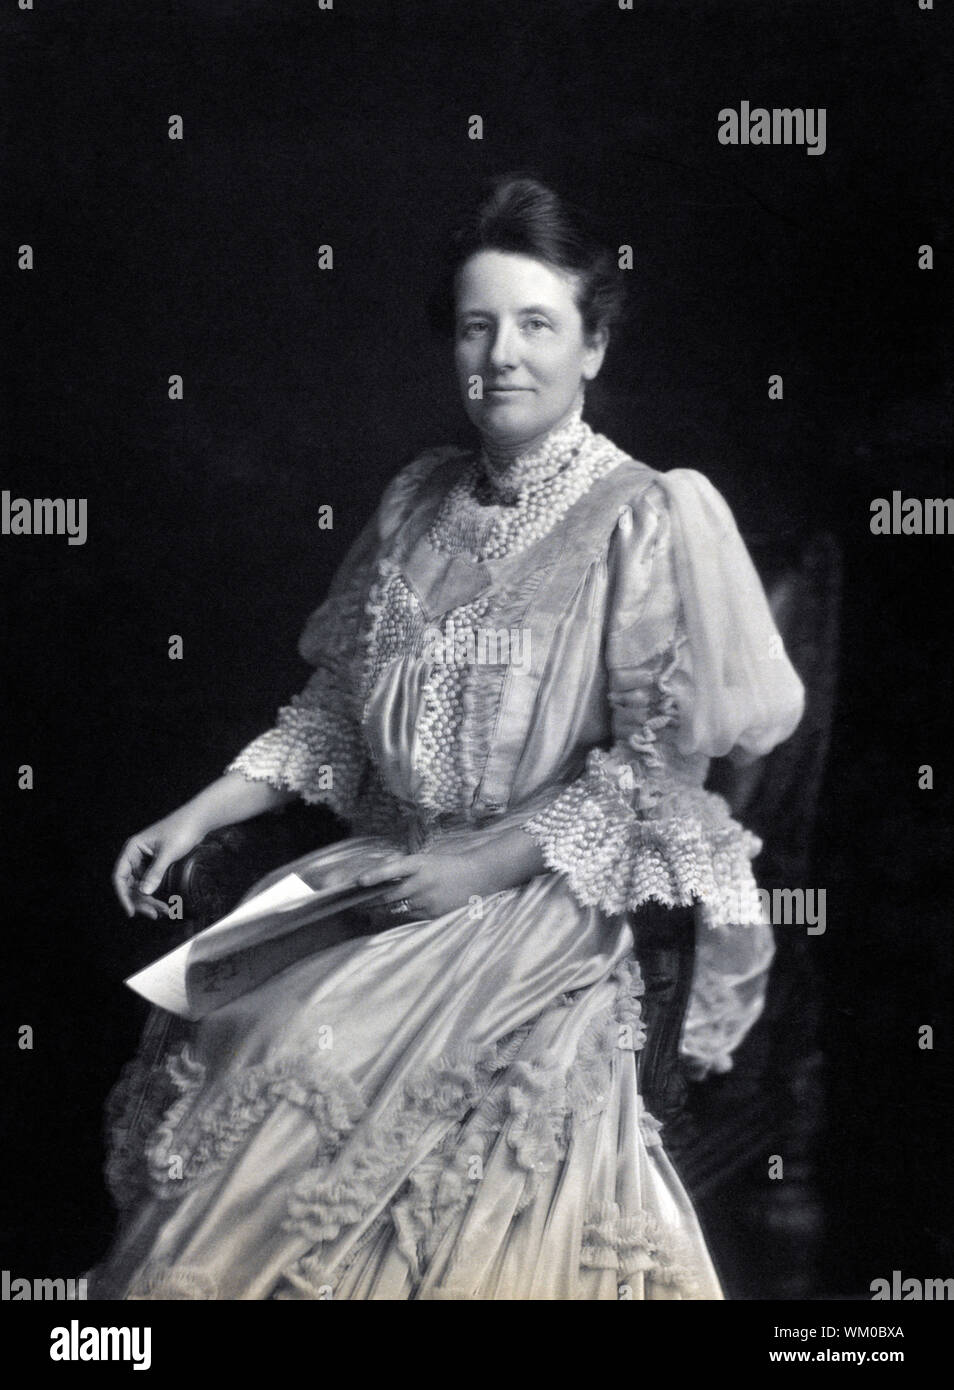 Edith Roosevelt (1861-1948), First Lady of the United States 1901-1909 ...